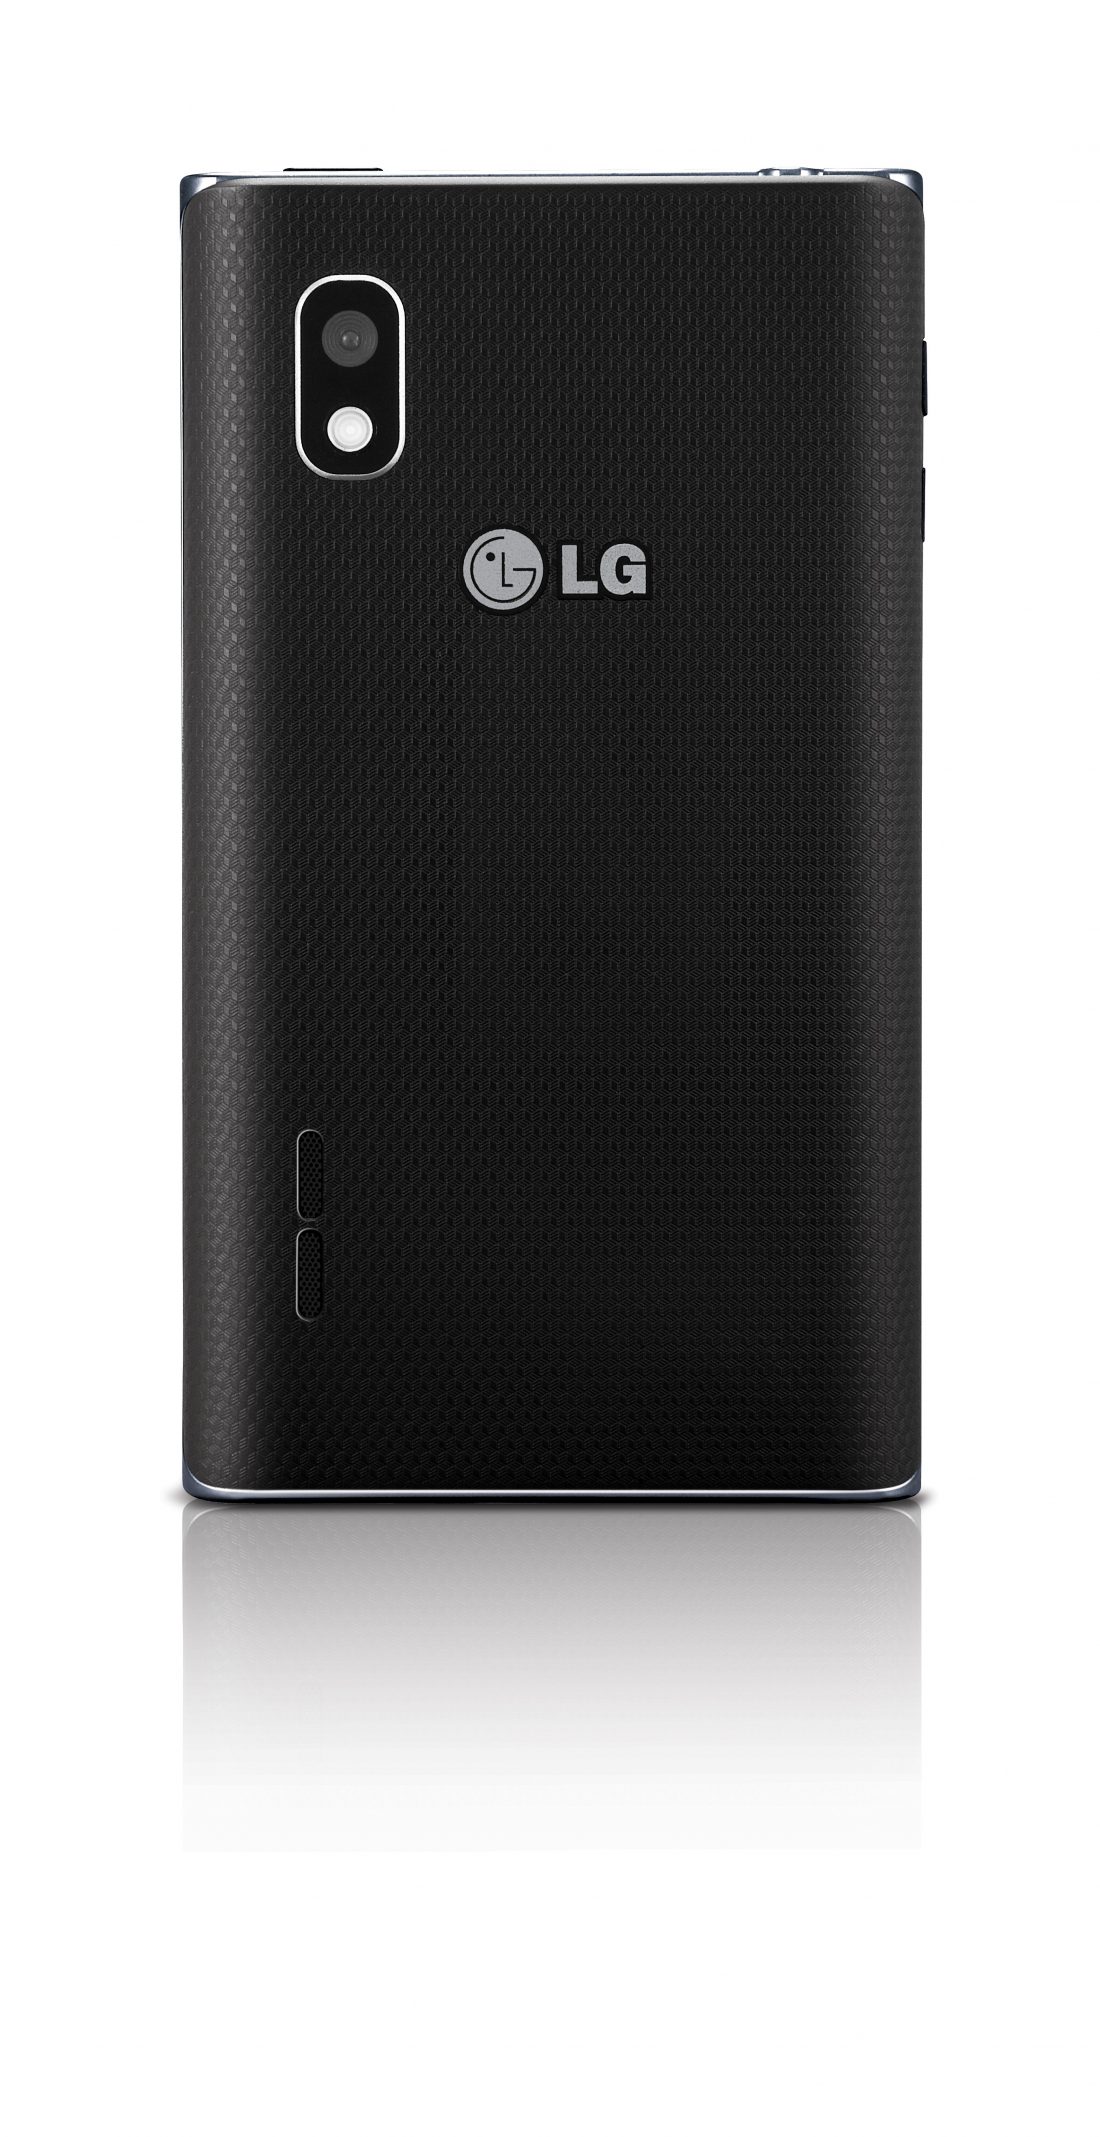 Rear view of the LG OPTIMUS L5 smartphone